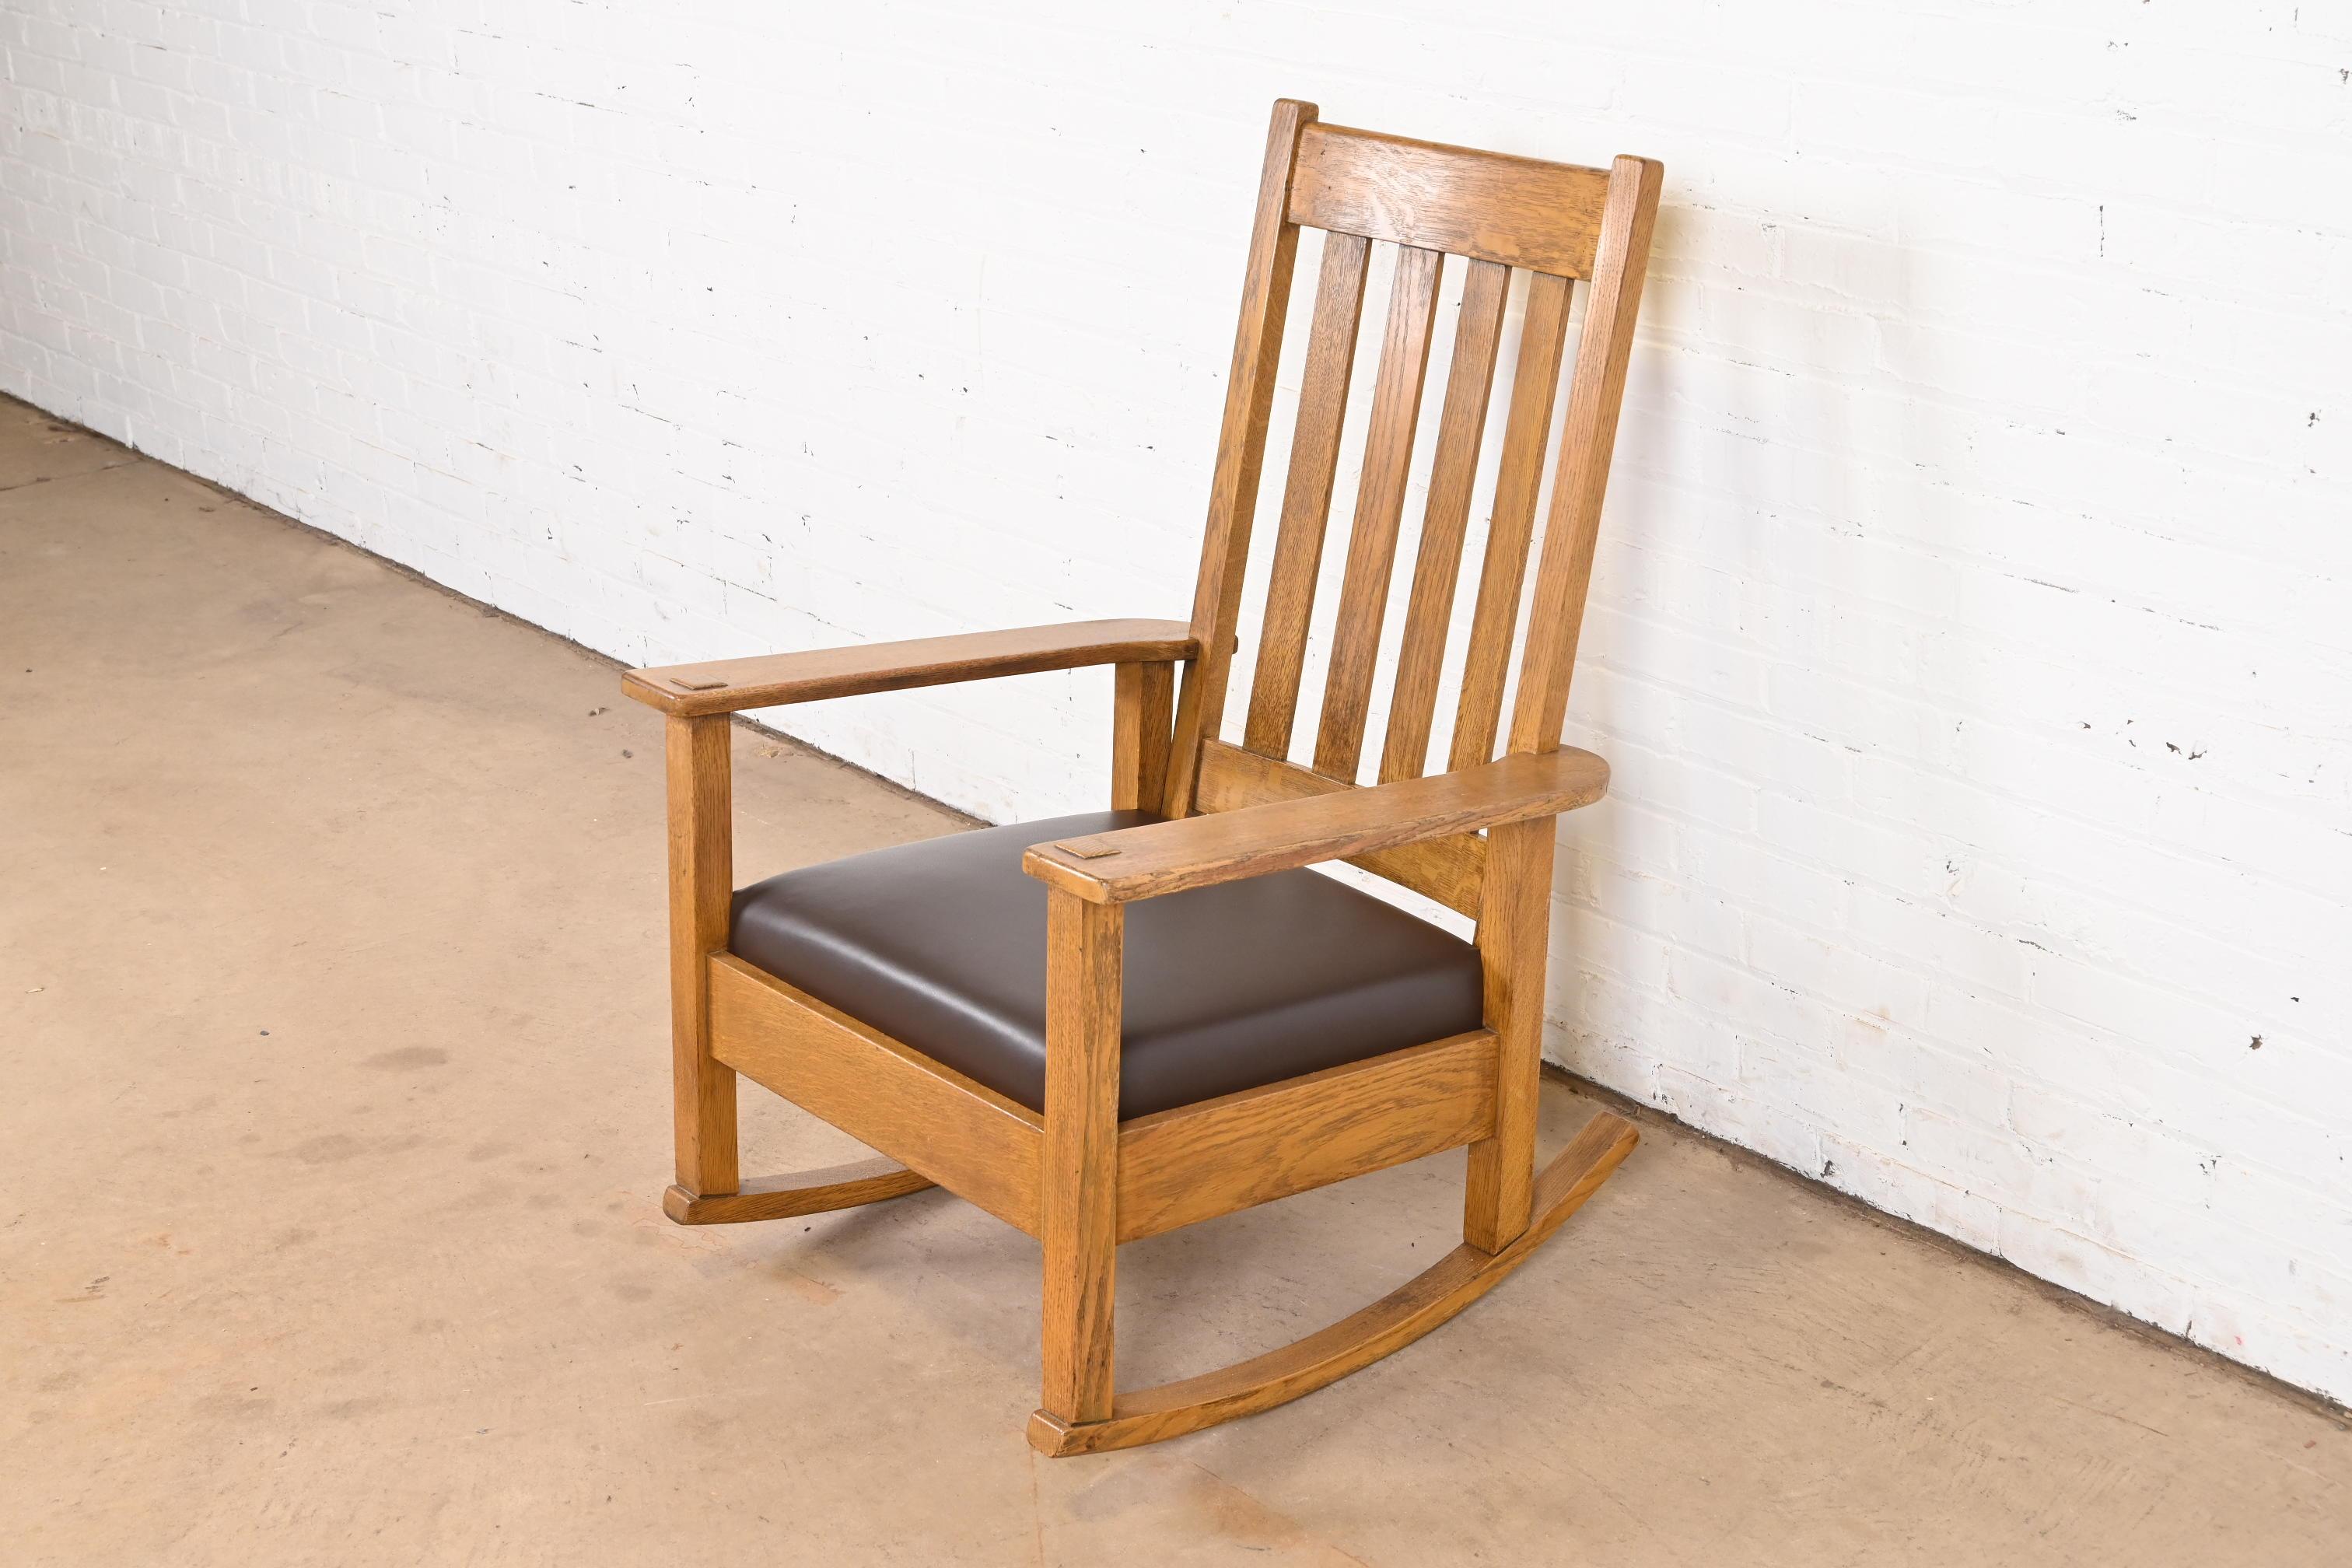 An exceptional Mission or Arts & Crafts period rocking chair

By Stickley Brothers

USA, Circa 1900

Solid quarter sawn oak, with brown leather upholstery.

Measures: 27.5